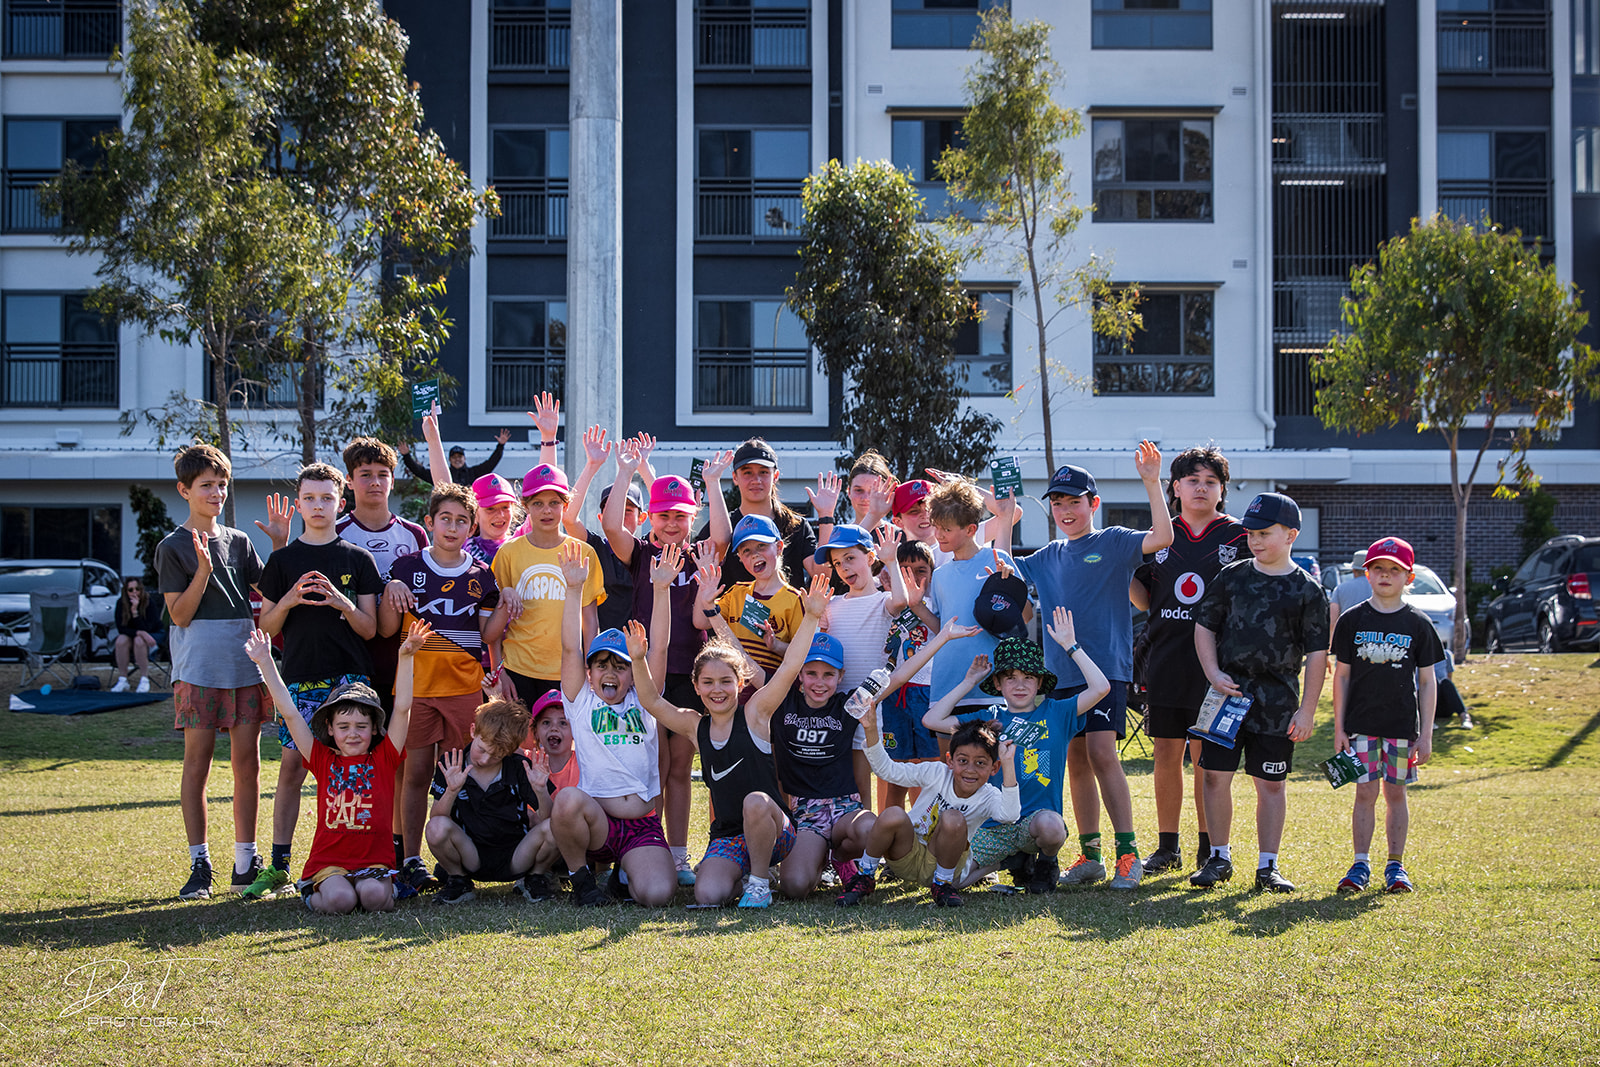 Kick it 4 Kids | Game Day Term 3, Carseldine, August 27th.